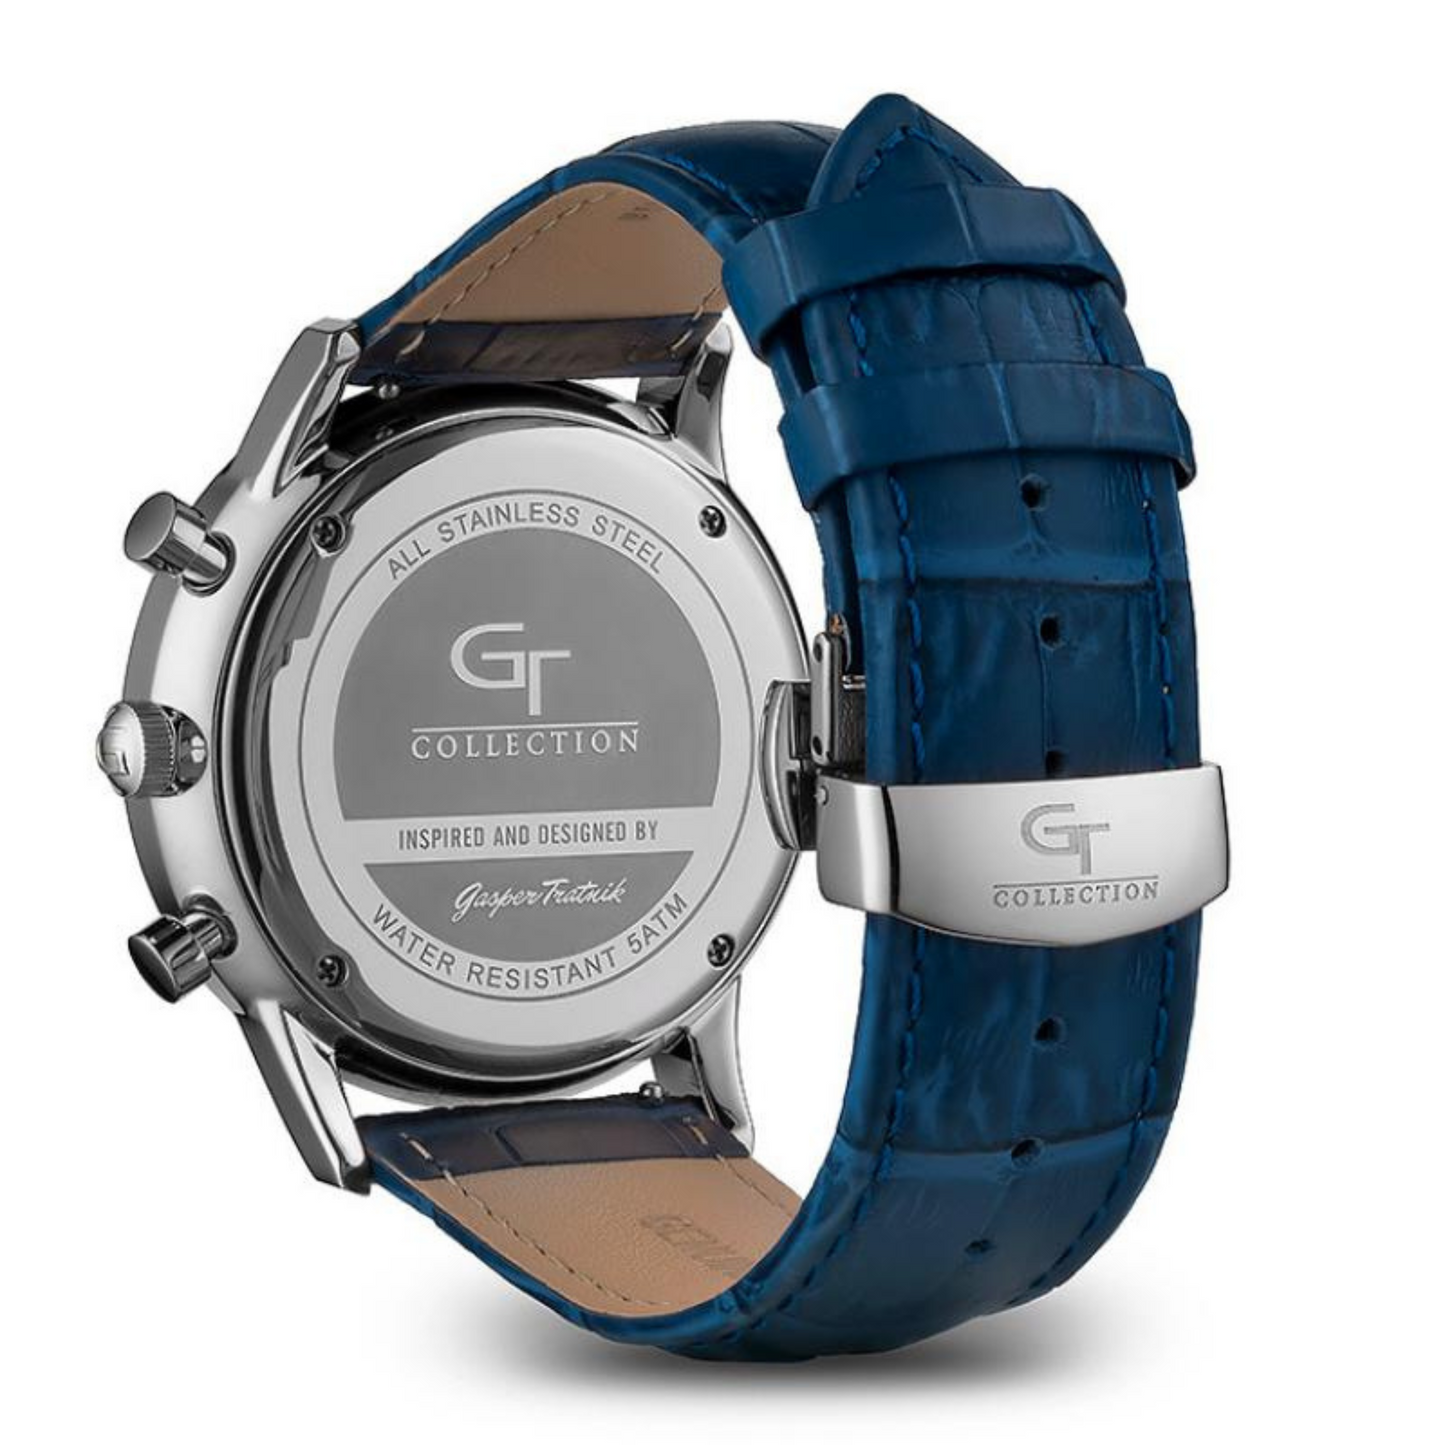 Men's Watch - Blue Leather Strap - White Watch Face